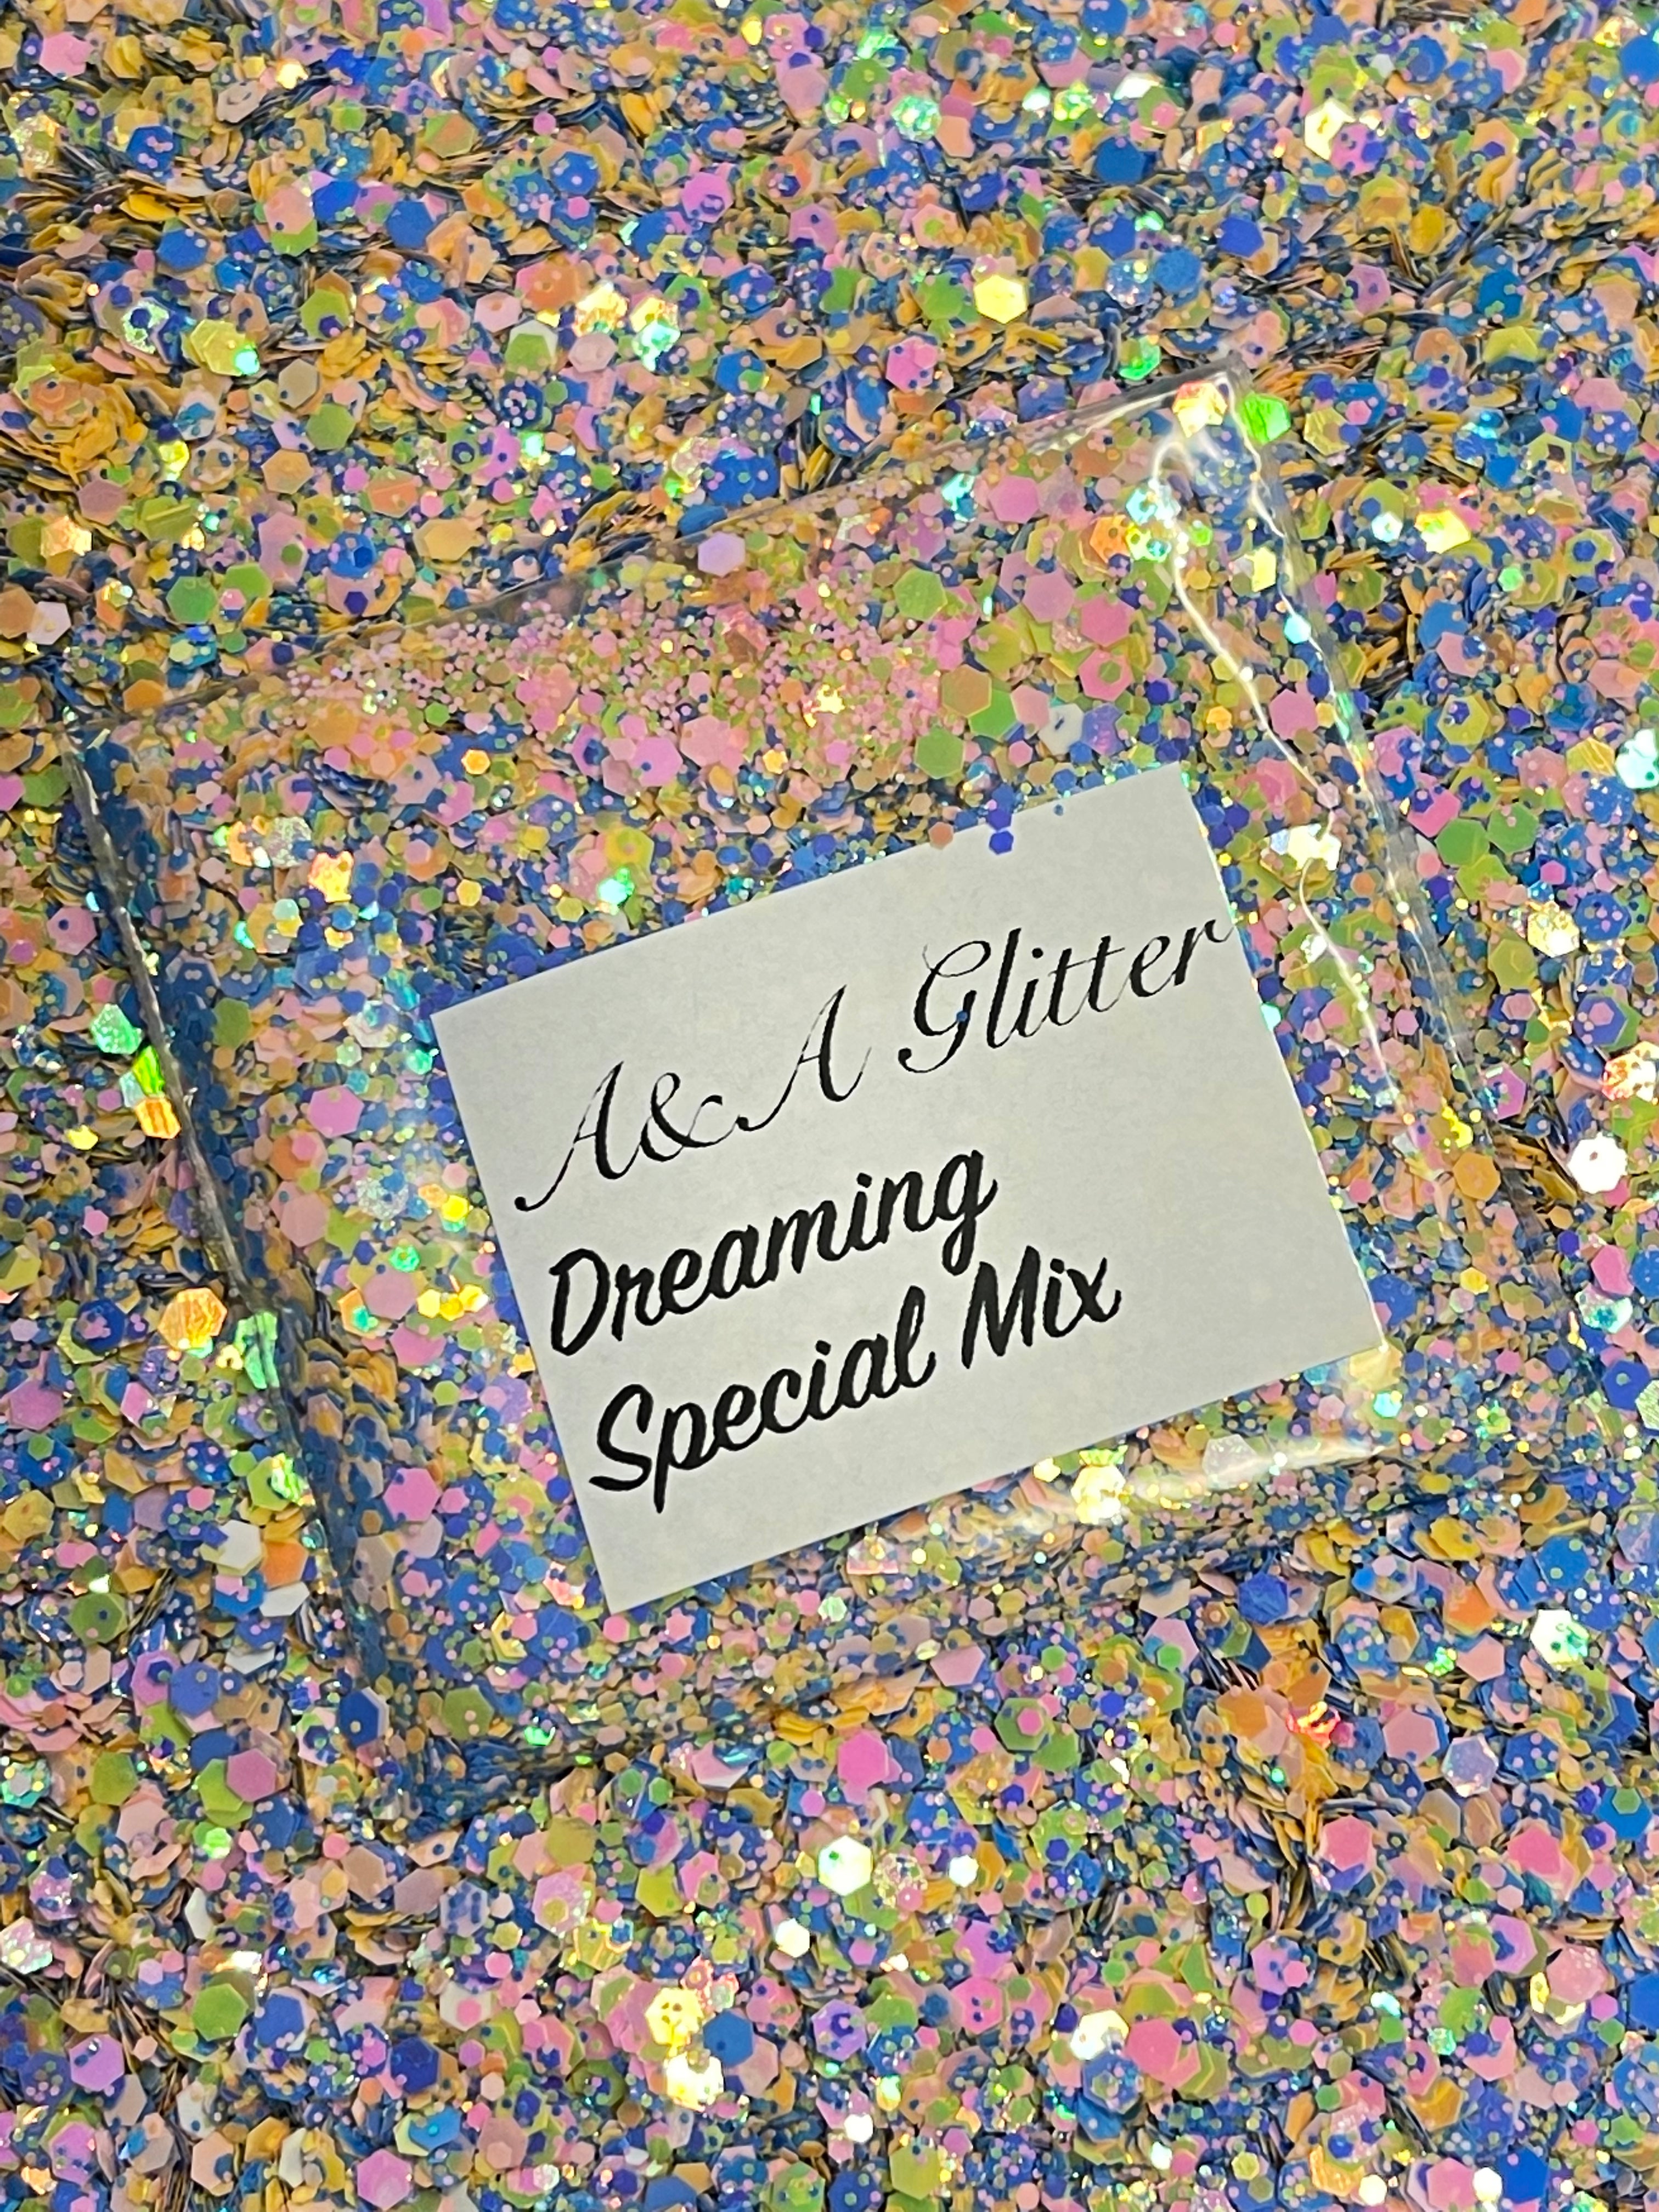 Dreaming - Special Mix